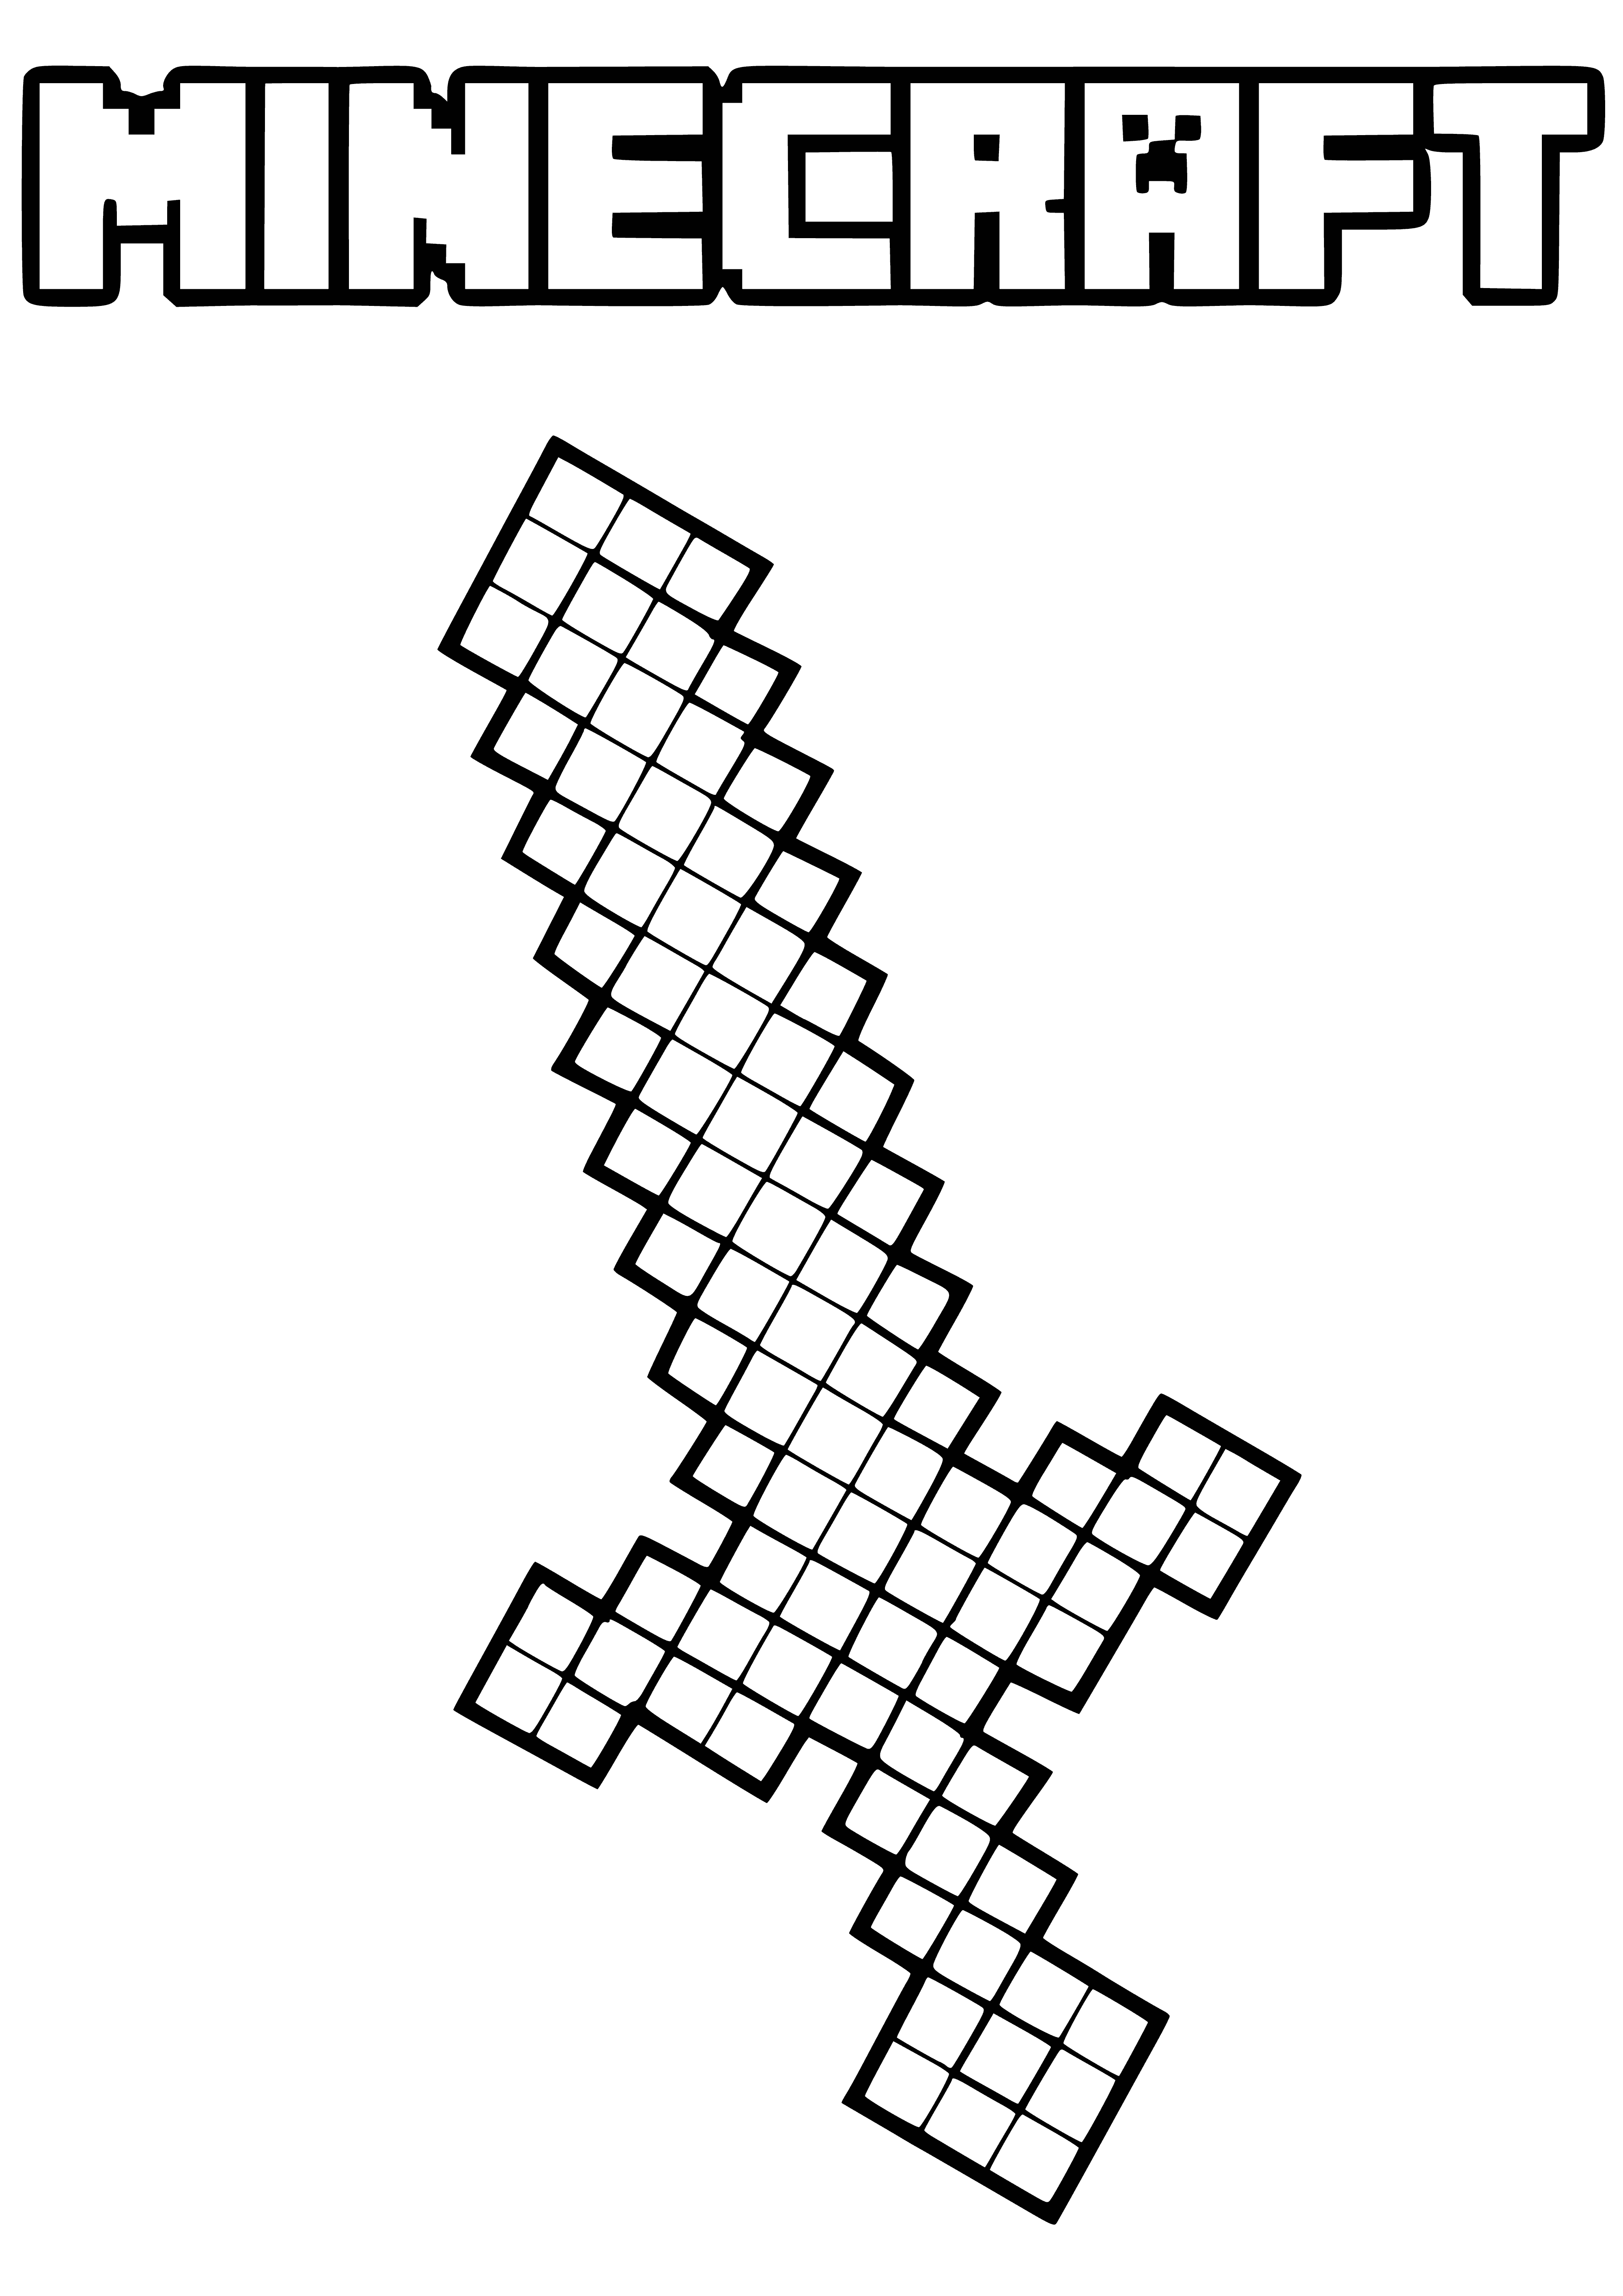 coloring page: Minecraft sword made of blocky pixels, reddish-brown in color, has handle & blade, slightly curved with sharp edges.